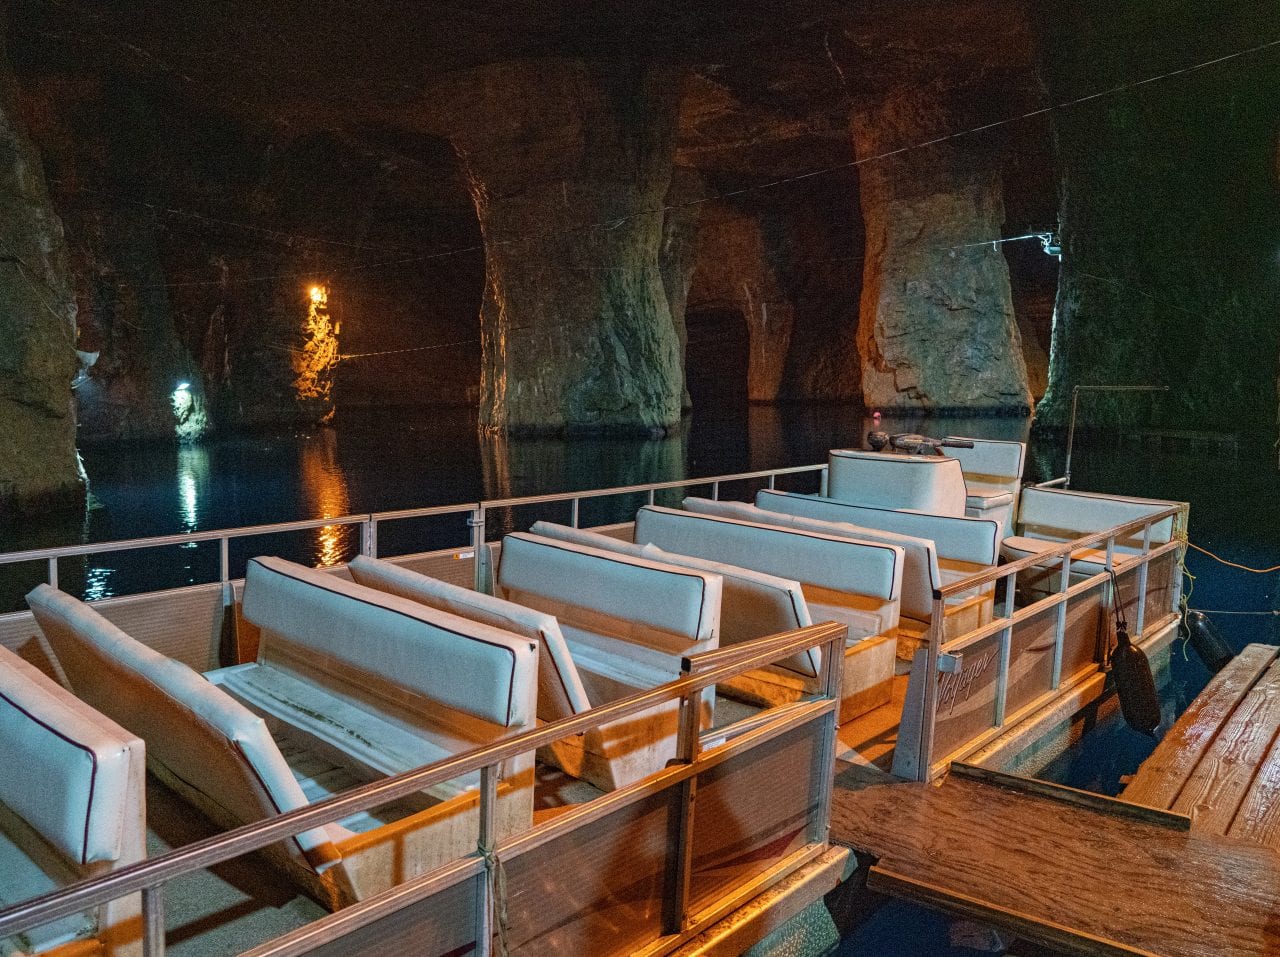 Boat at the Bonne Terre Mine